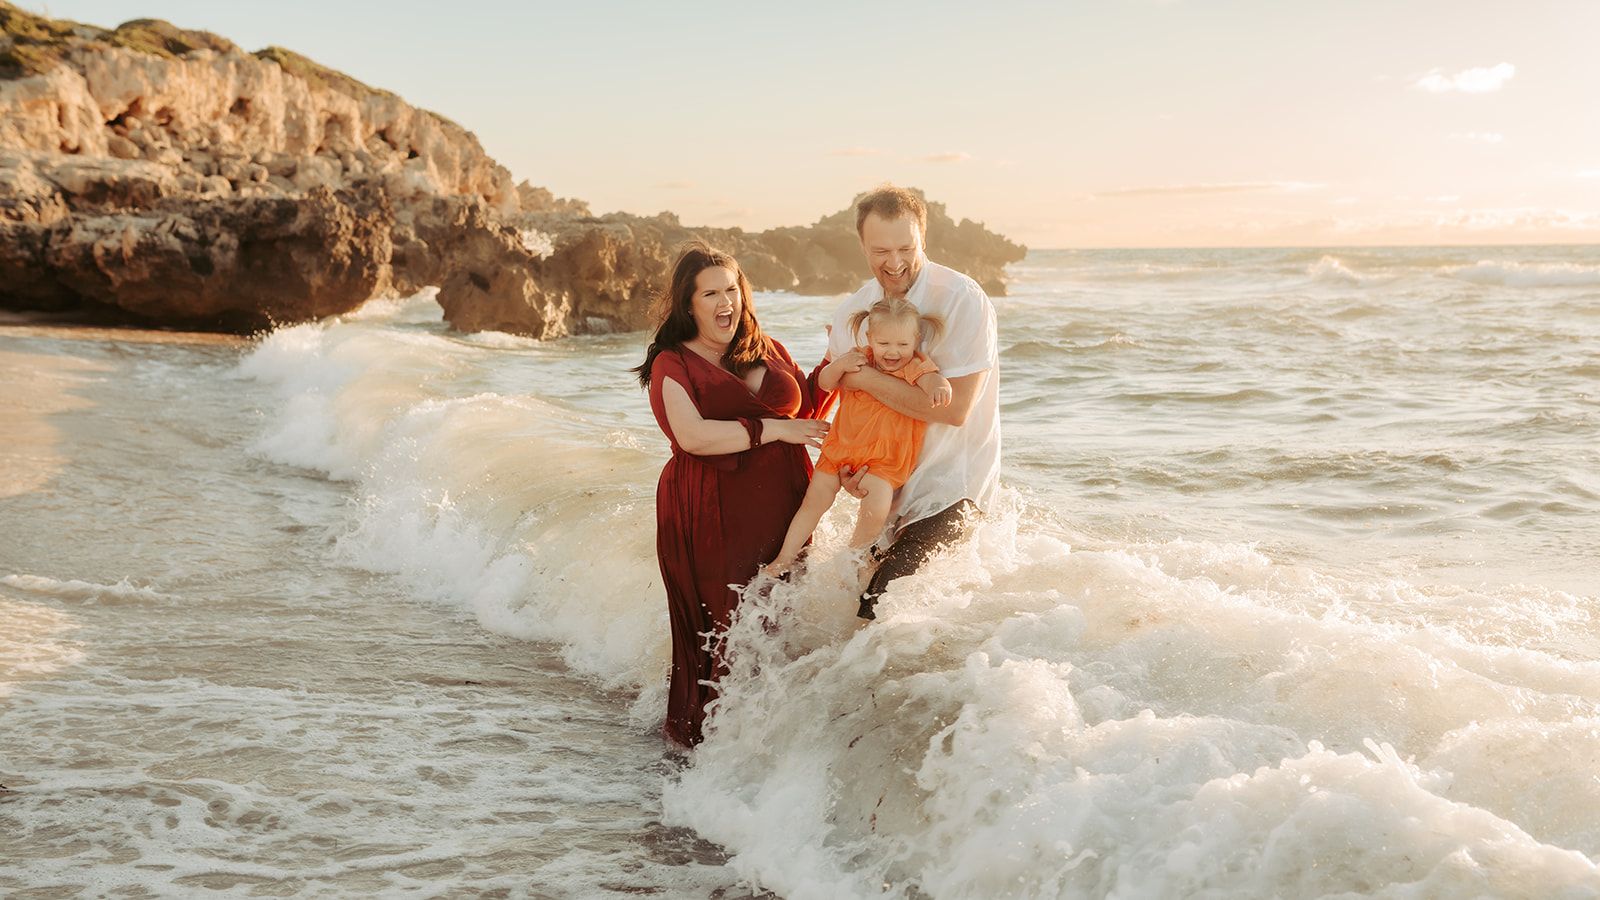 A fun maternity photography session in the water at one of Perth's best beaches.